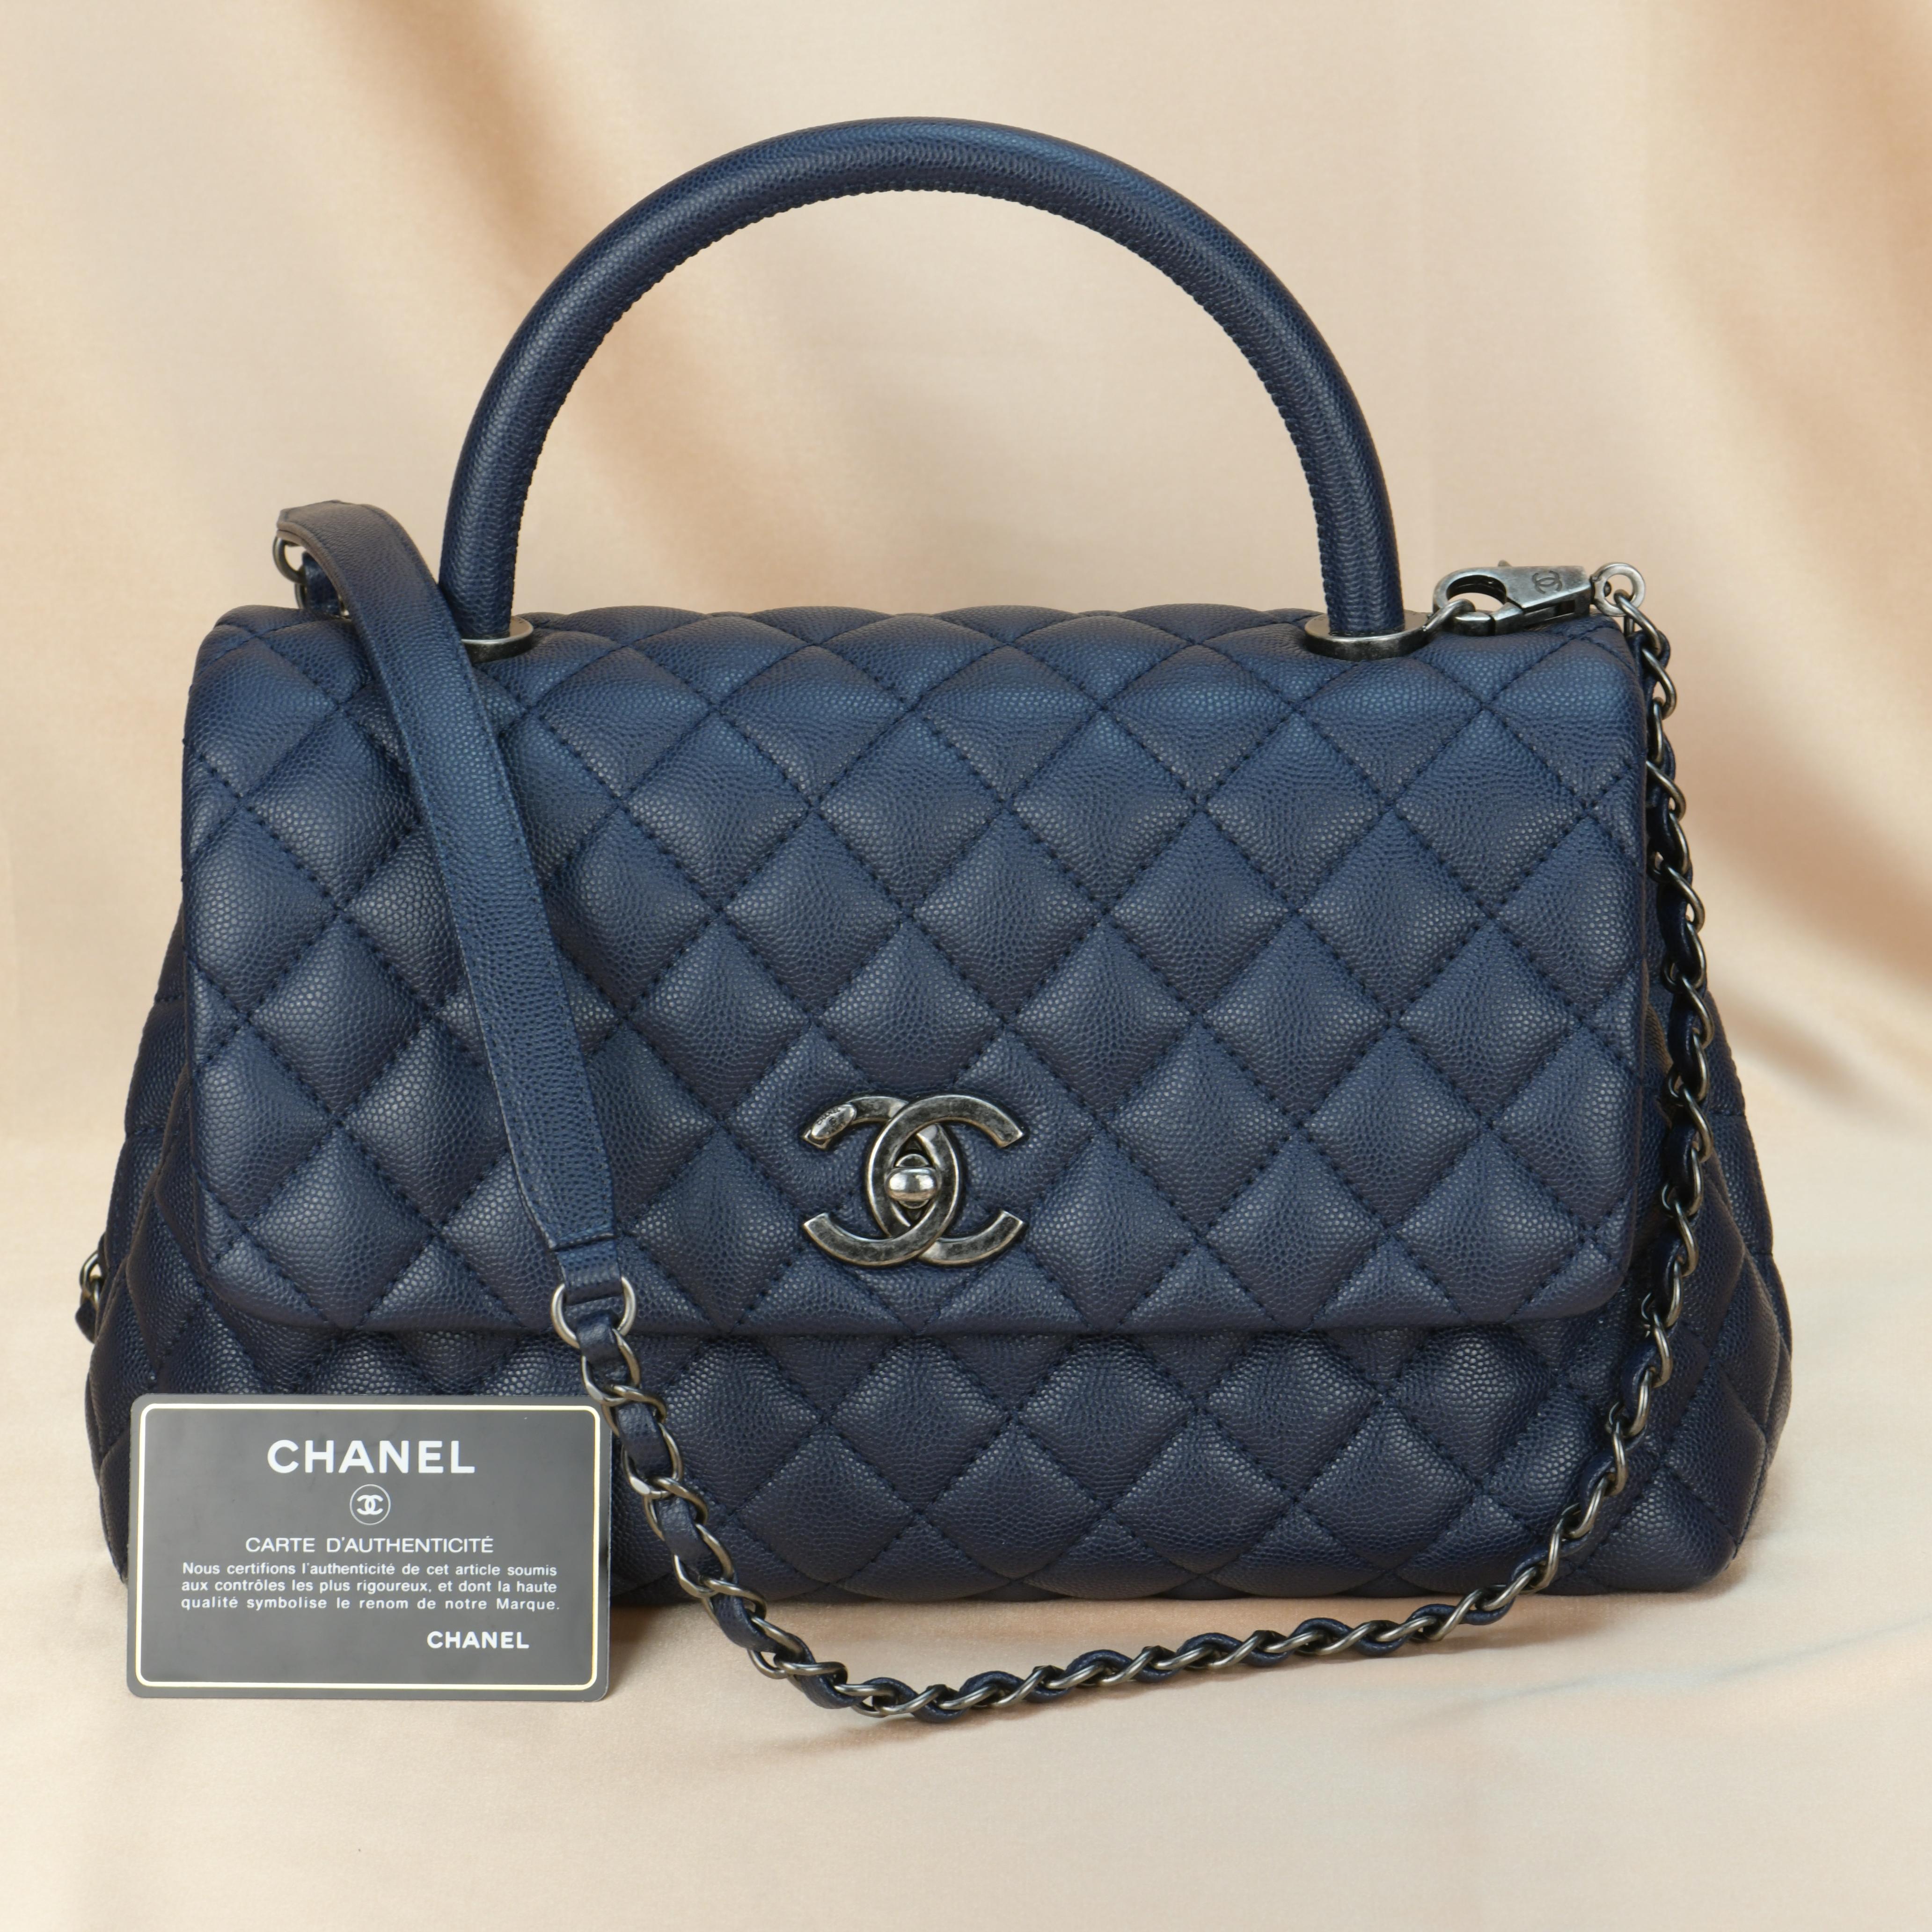 Brand	Chanel
Model	Coco Handle
Serial No.	23******
Color	Navy Blue
Date	Approx. 2016
Metal	Silver 
Material	Caviar Calfskin
Measurements    Approx. 33 x 21 x 12cm
Condition	Excellent 
Comes with	Chanel Dust bag and Authentic Card

If you are